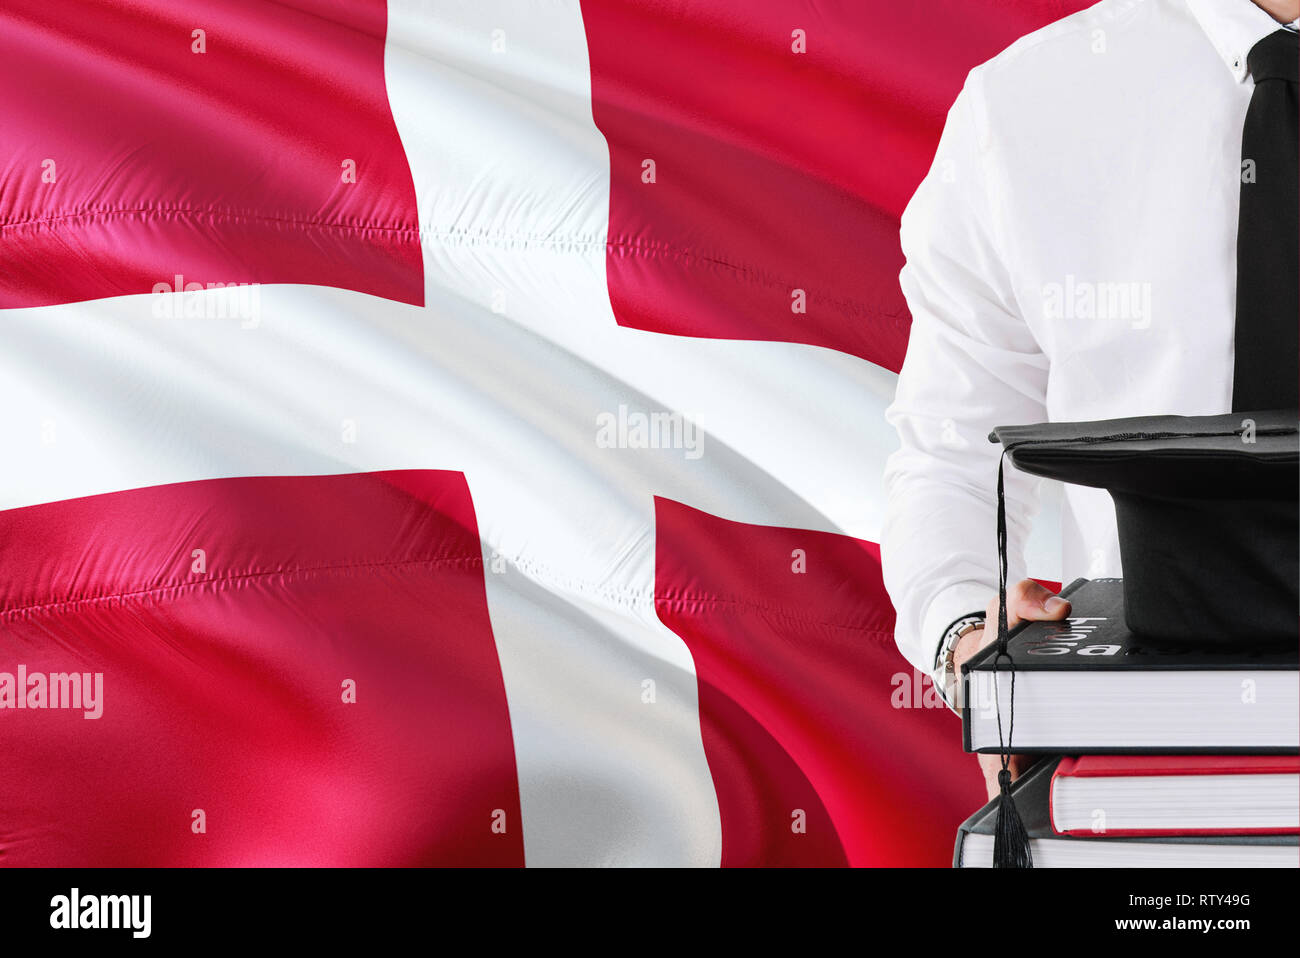 Successful Danish student education concept. Holding books and graduation cap over Denmark flag background. Stock Photo